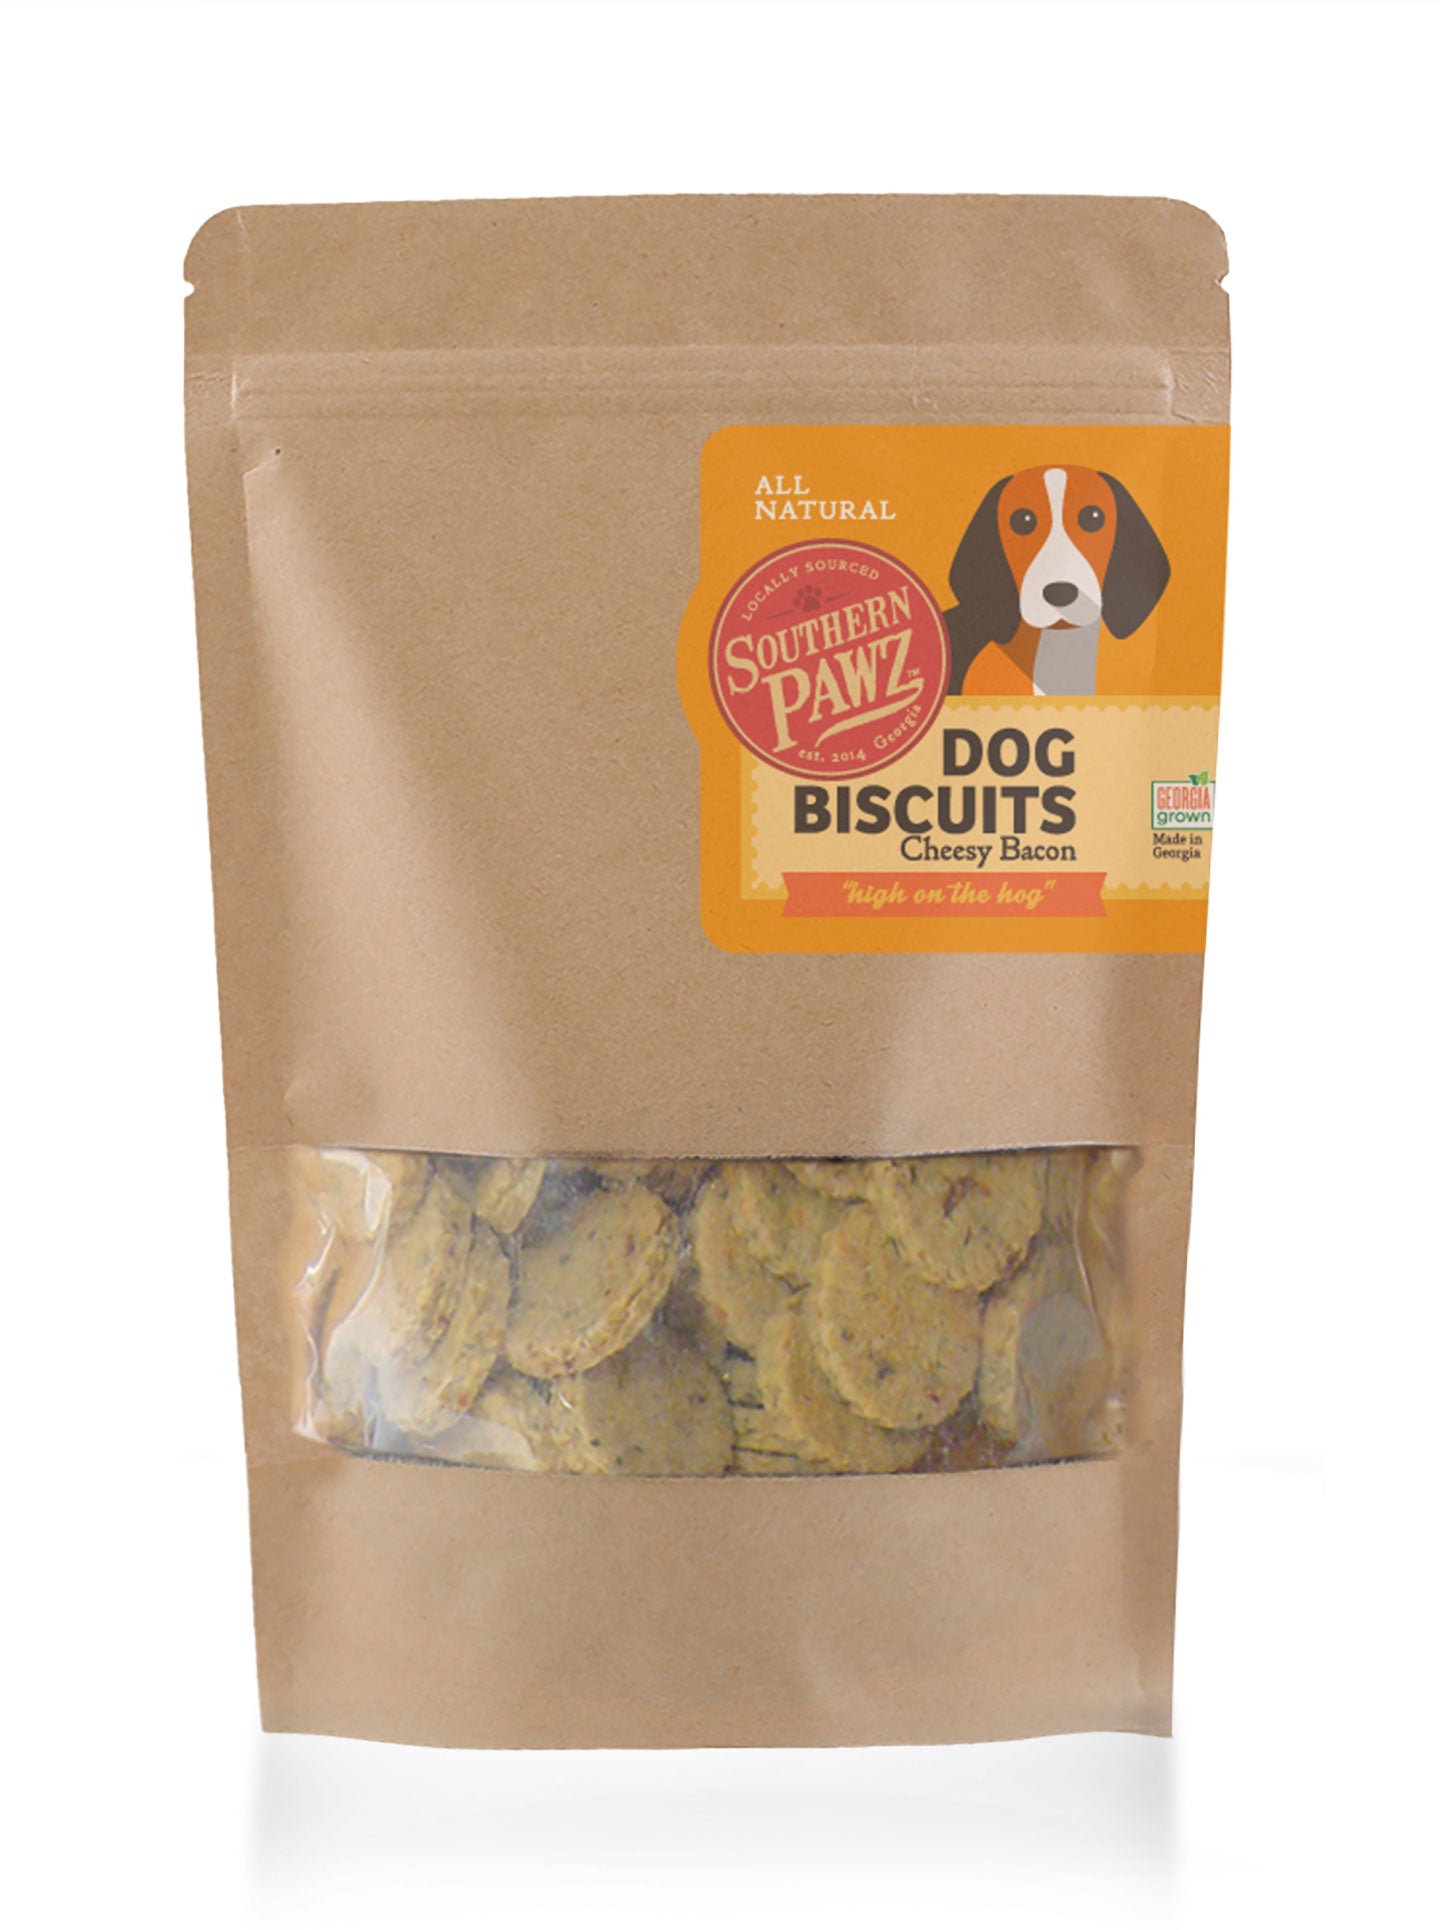 Dog Biscuits - Cheesy Bacon 5.5 oz. Resealable Bag Cookie Size Bites